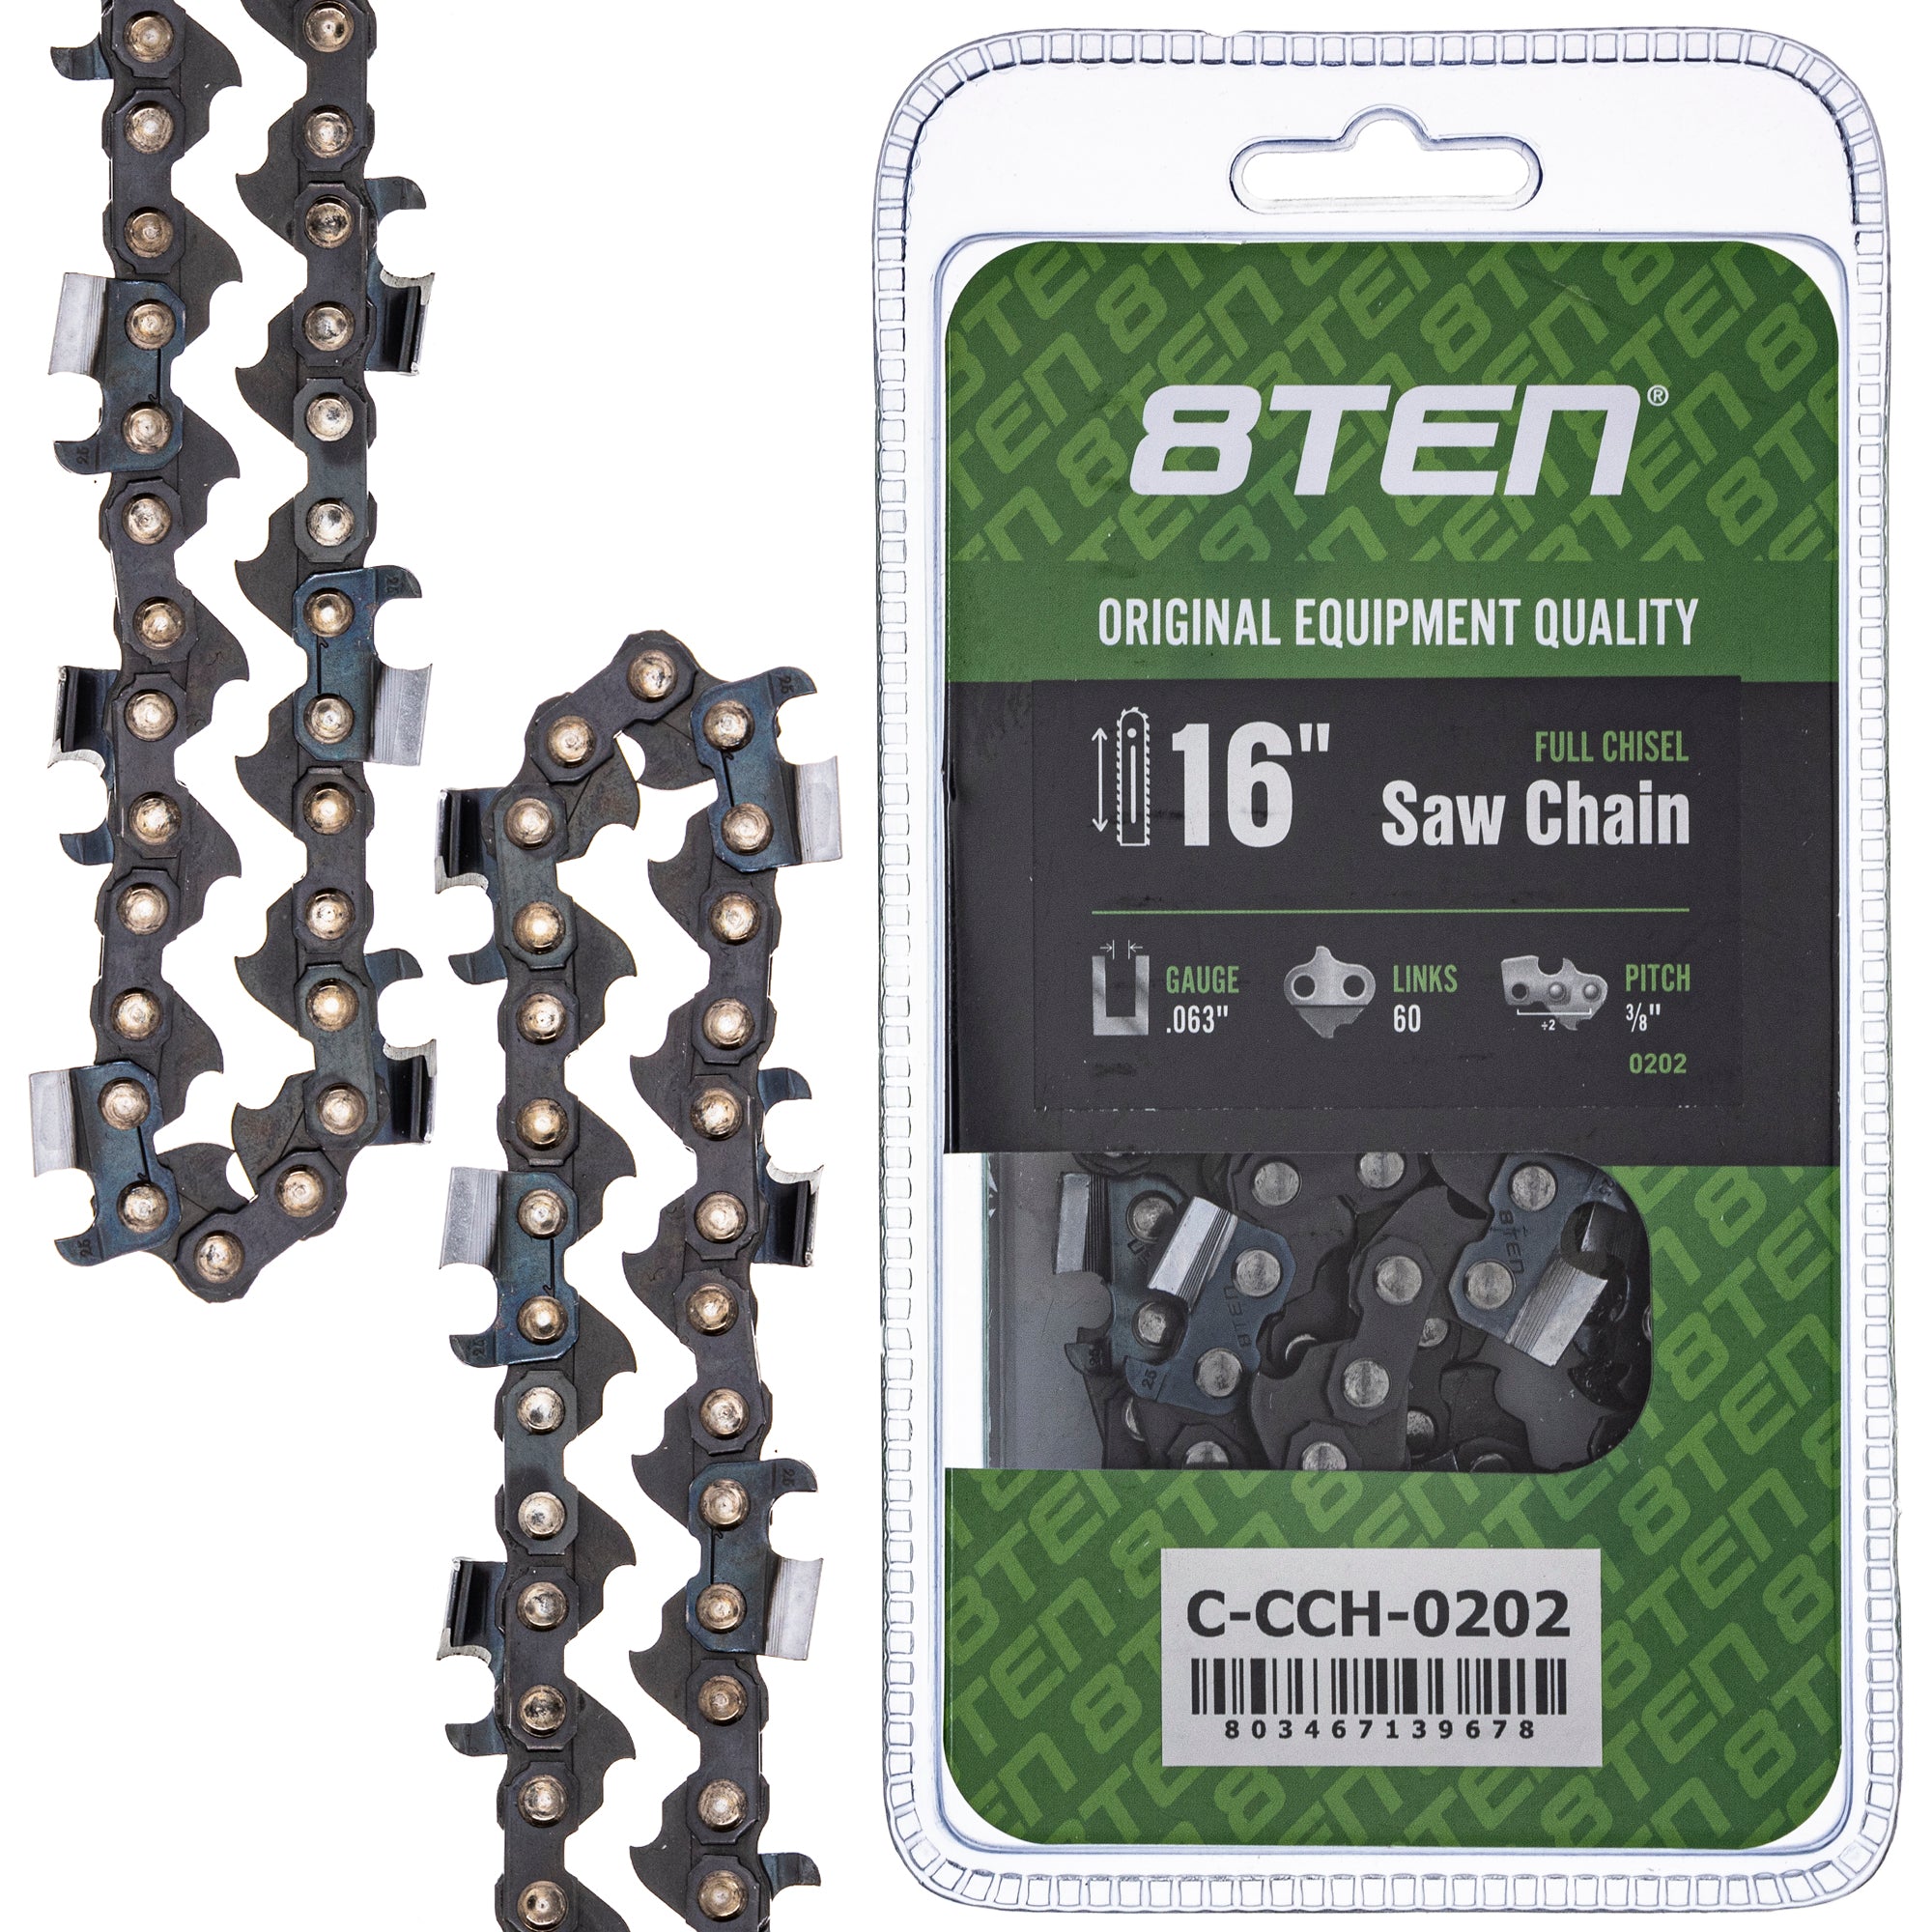 8TEN MK1010412 Guide Bar & Chain for MSE MS E 066